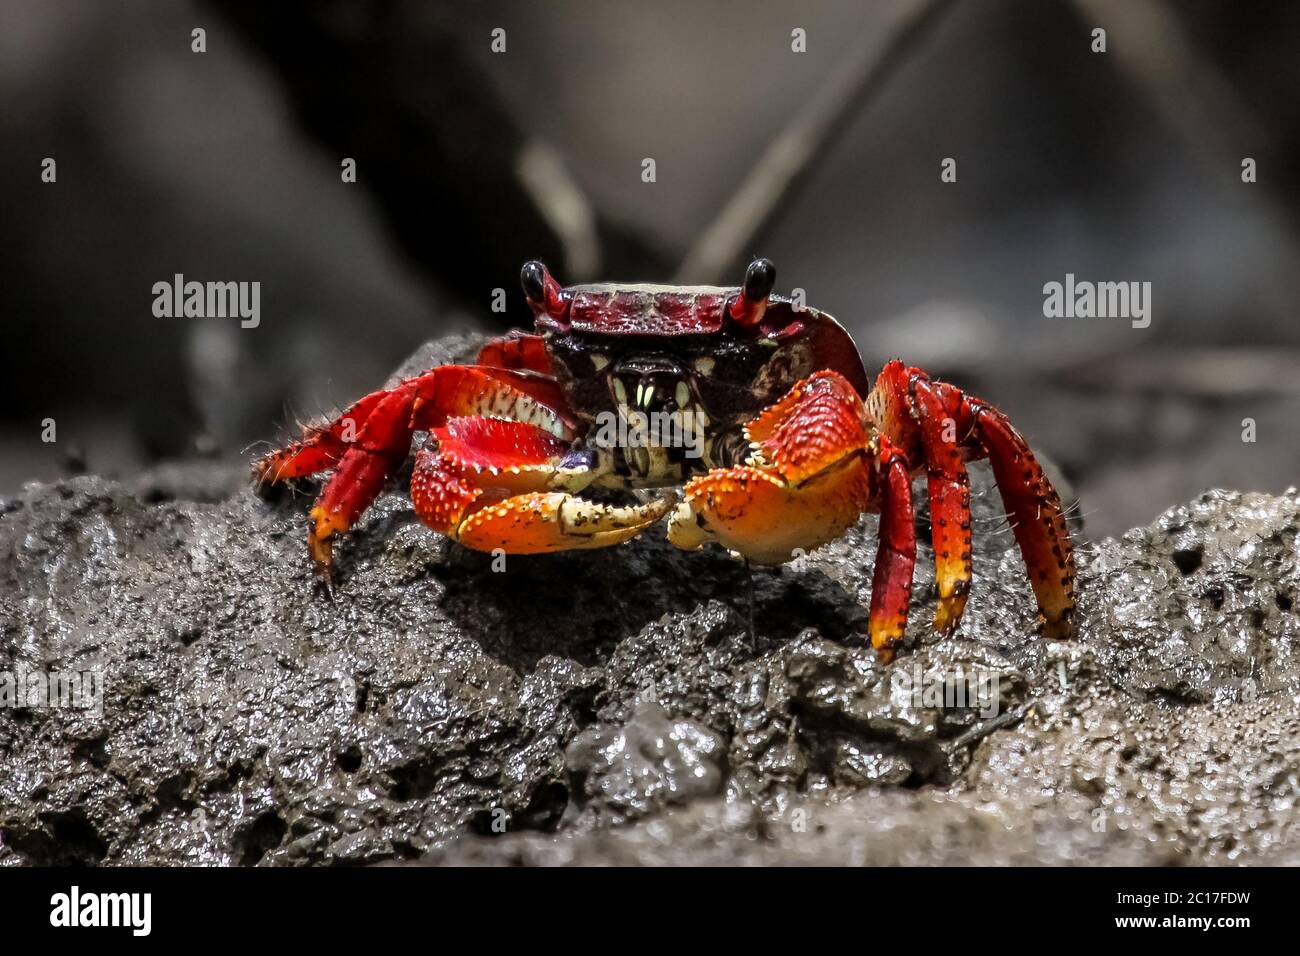 Close up of a red crab in the mangroves, Itacare, Brazil Stock Photo